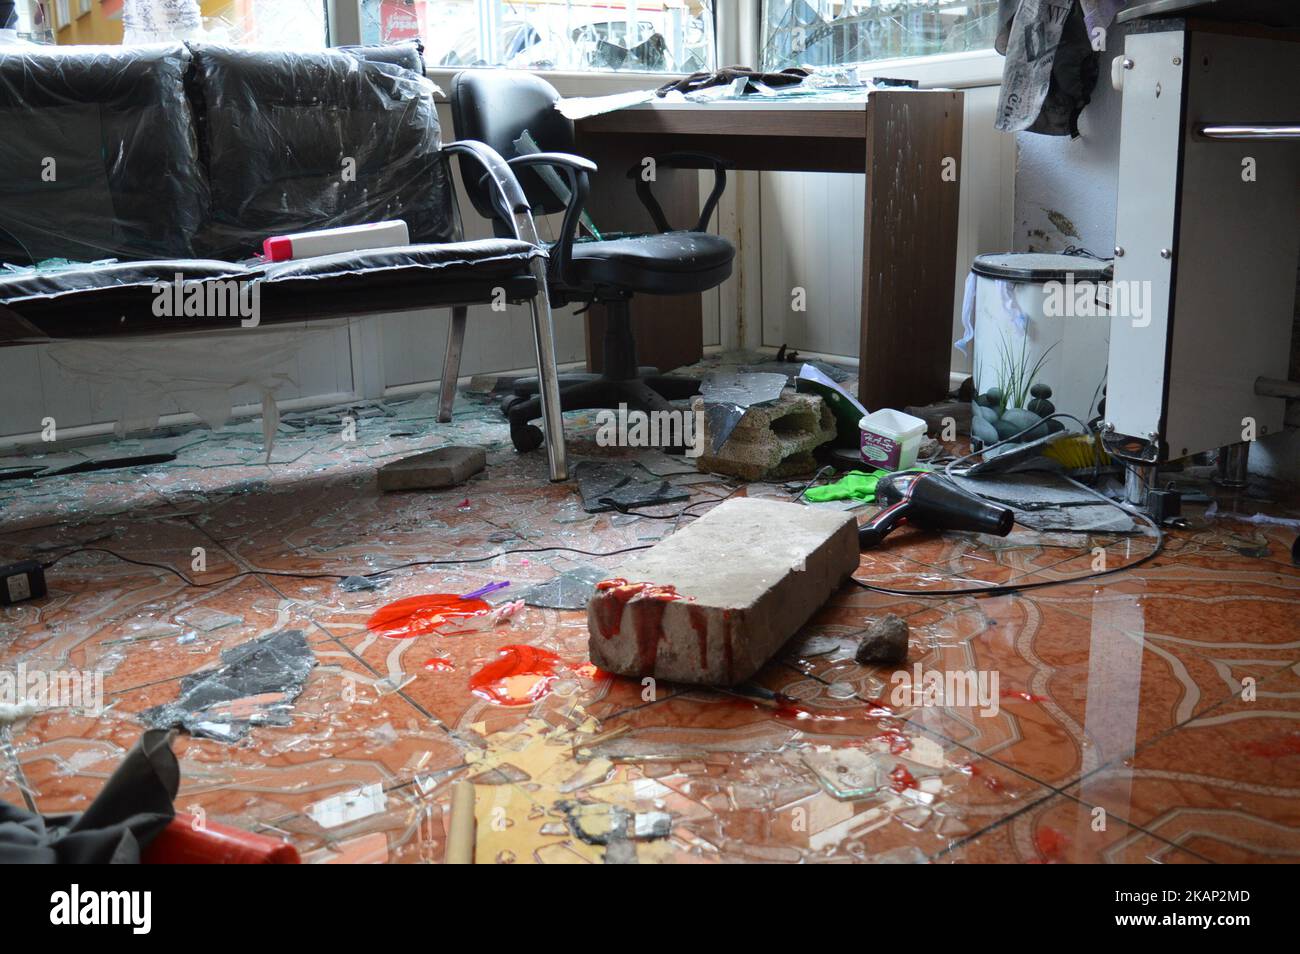 An Iraqi barber shop is seen heavily damaged after a conflict between Turkish citizens and Syrian refugees at Demetevler neighbourhood in Ankara, Turkey on July 04, 2017. In the last hours of July 03, a group of Syrian refugees conflicted with local residents as the police dispersed the two groups with water cannon vehicles and gas bombs at the neighbourhood. After the conflict, the residents took to the streets to protest against the Turkish government's refugee policy. As a result of the conflict, a person was injured, and numerous workplaces in the neighbourhood were damaged. (Photo by Alta Stock Photo